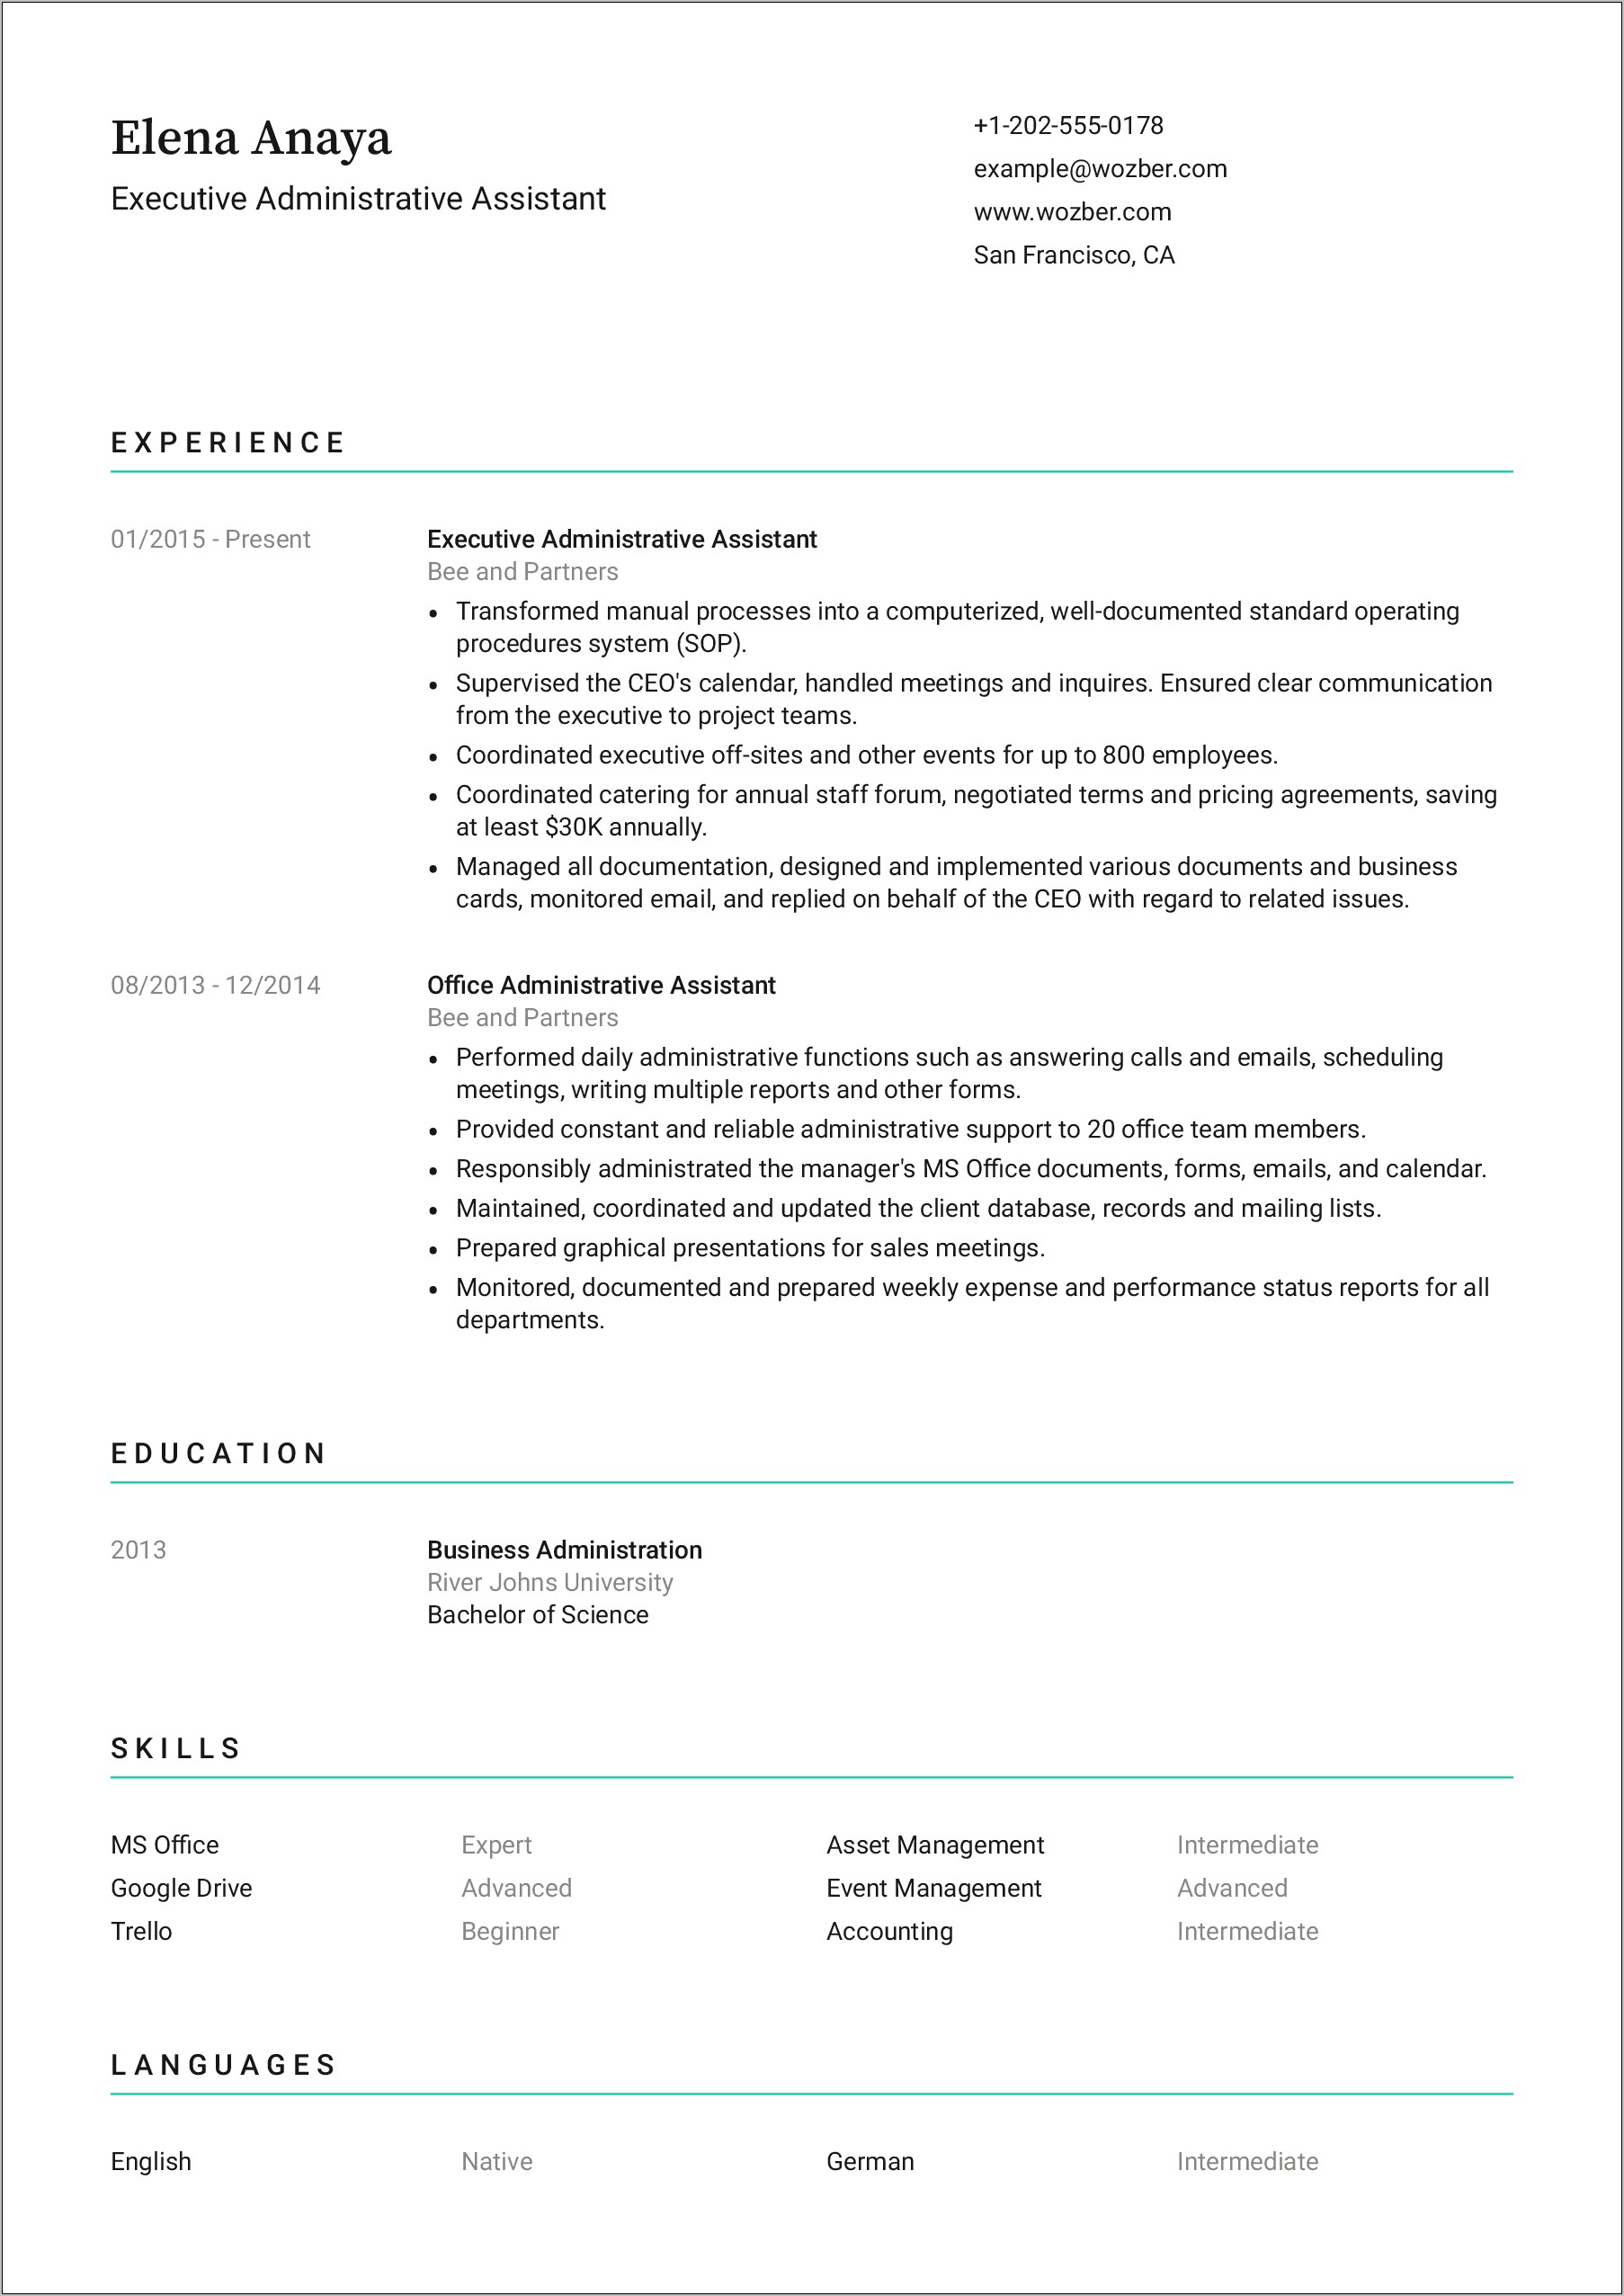 Description Of An Administrative Assistant For A Resume